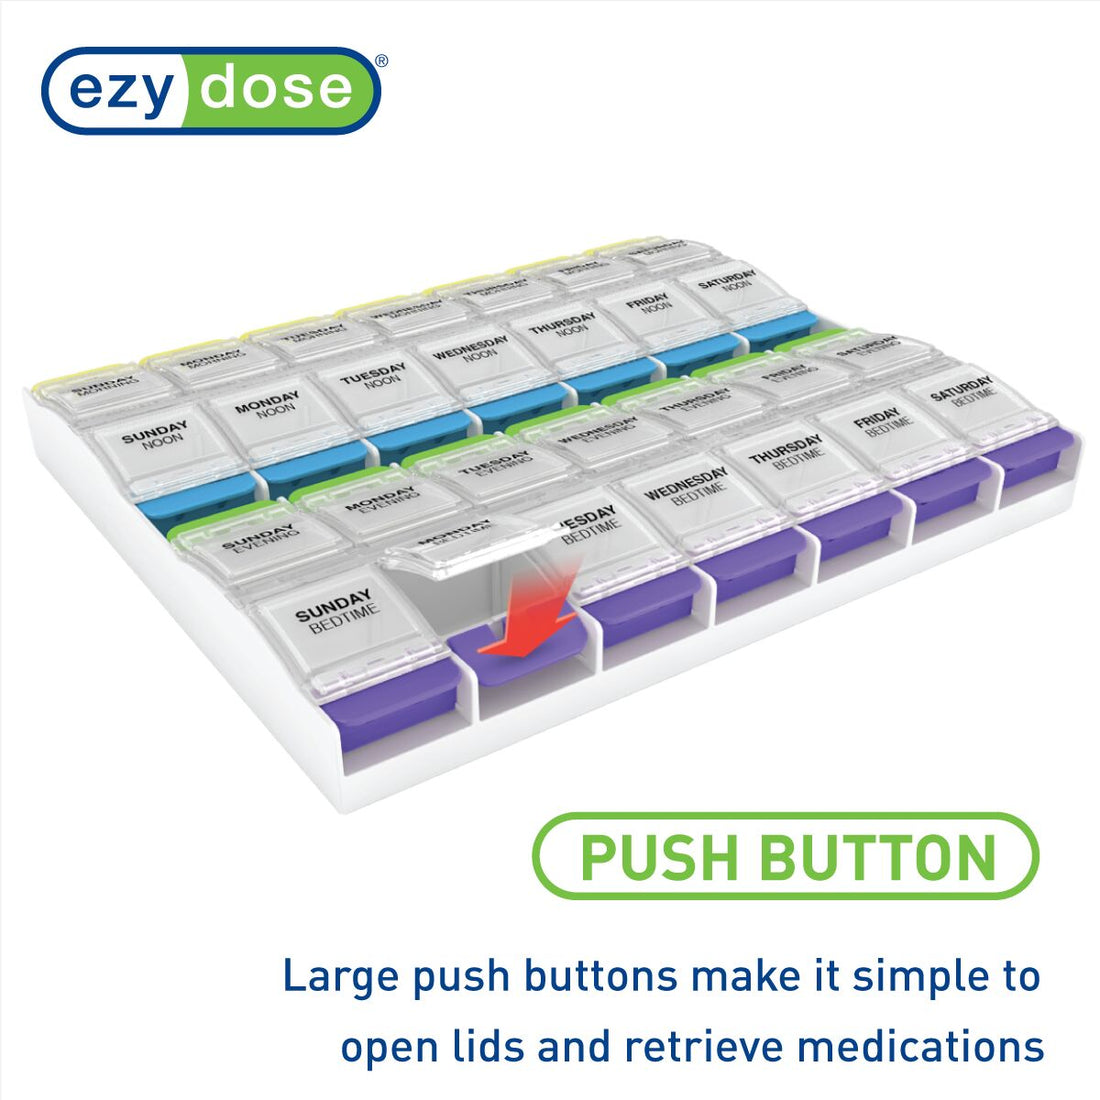 Weekly Medtime pill organizer is easy to open, large push buttons make it simple to open lids and retrieve medications